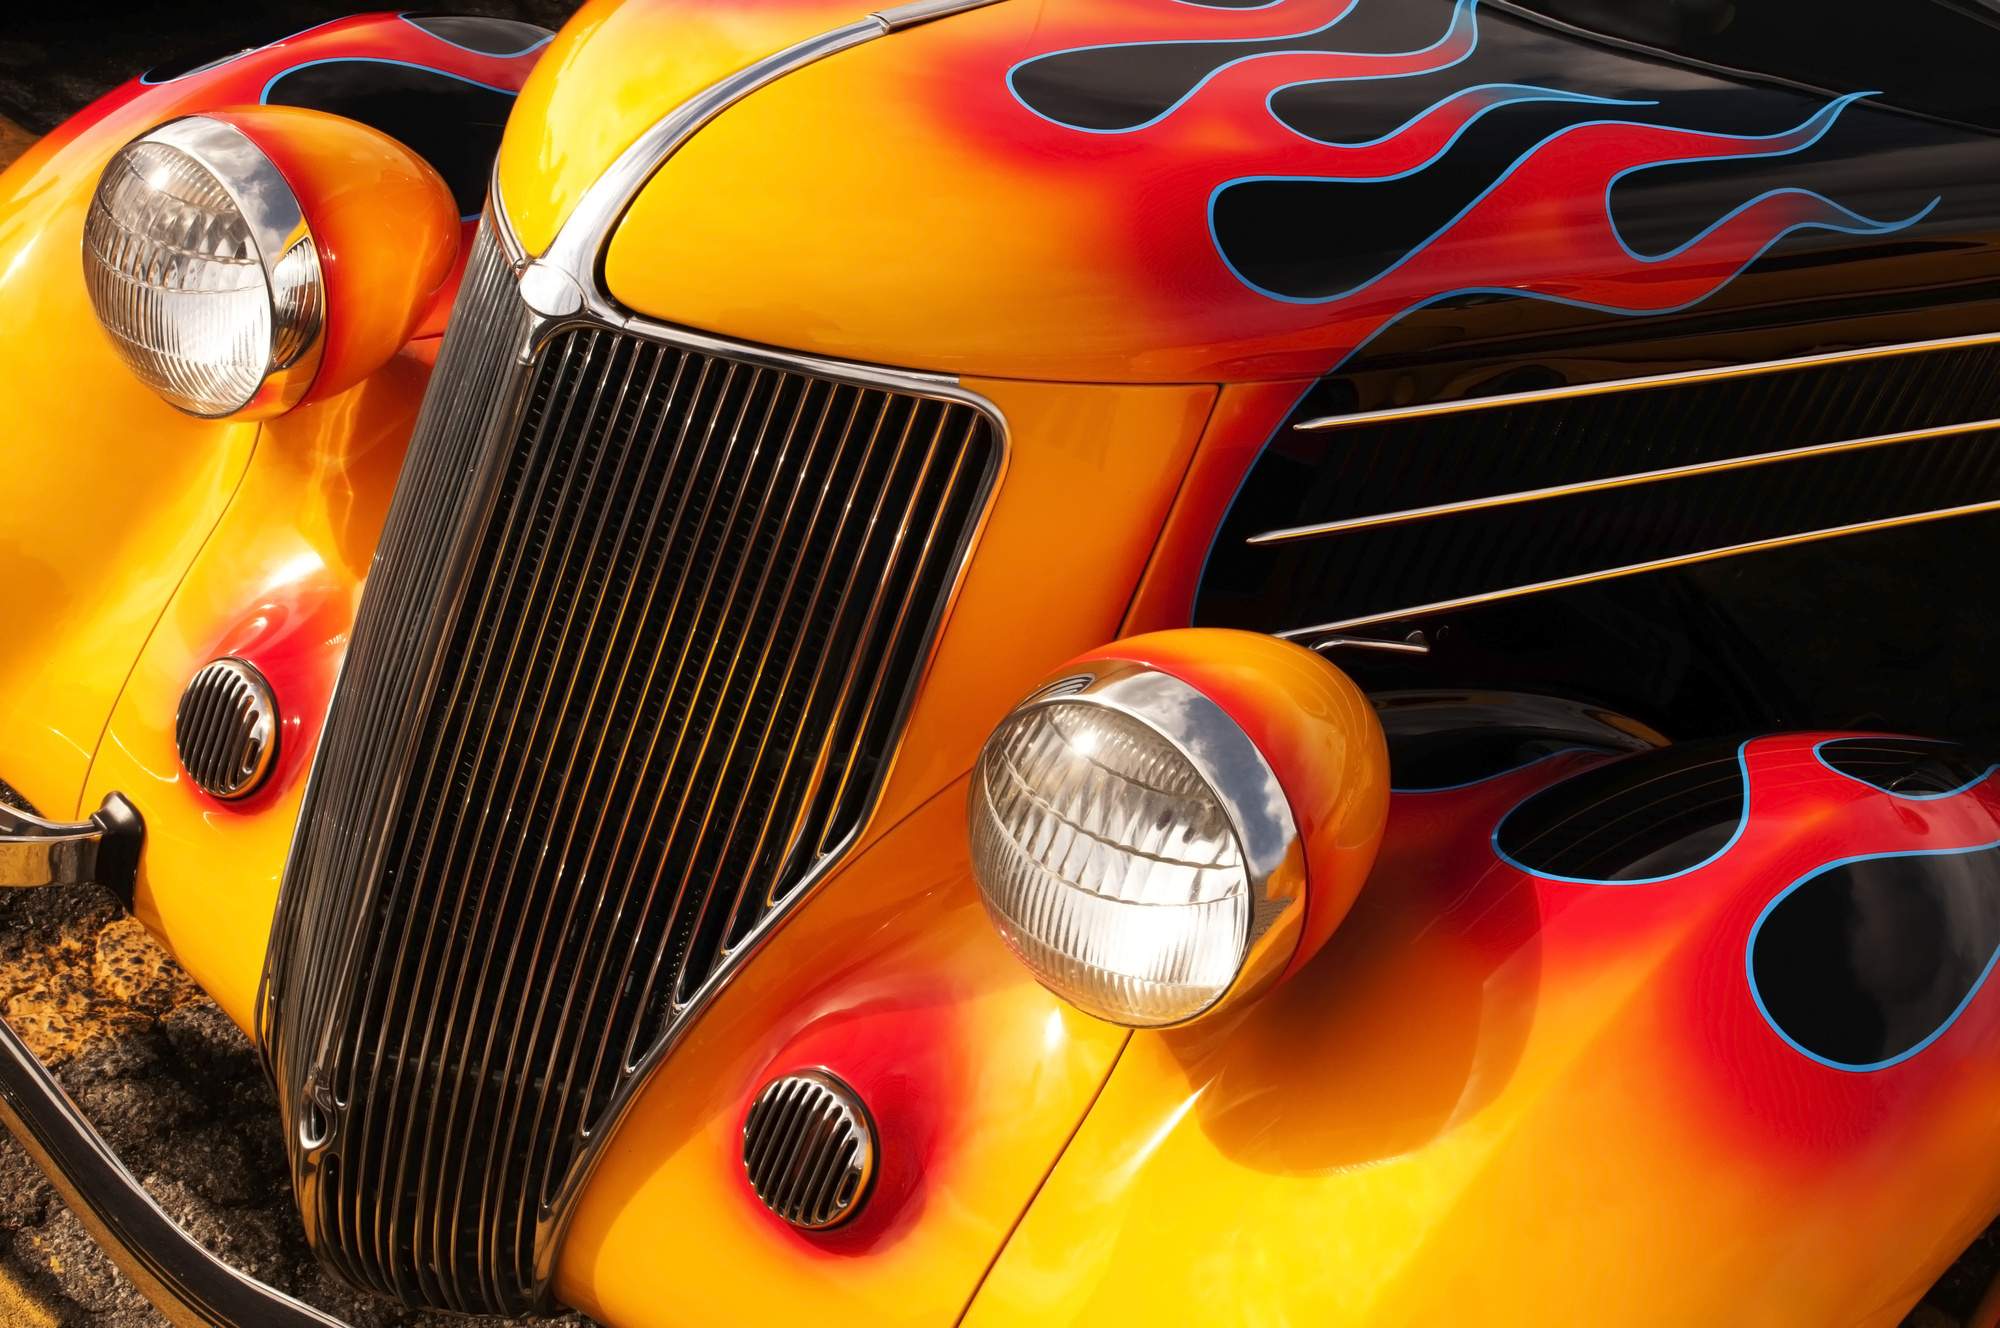 On Your Marks, Get Set Go! How to Build a Hot Rod